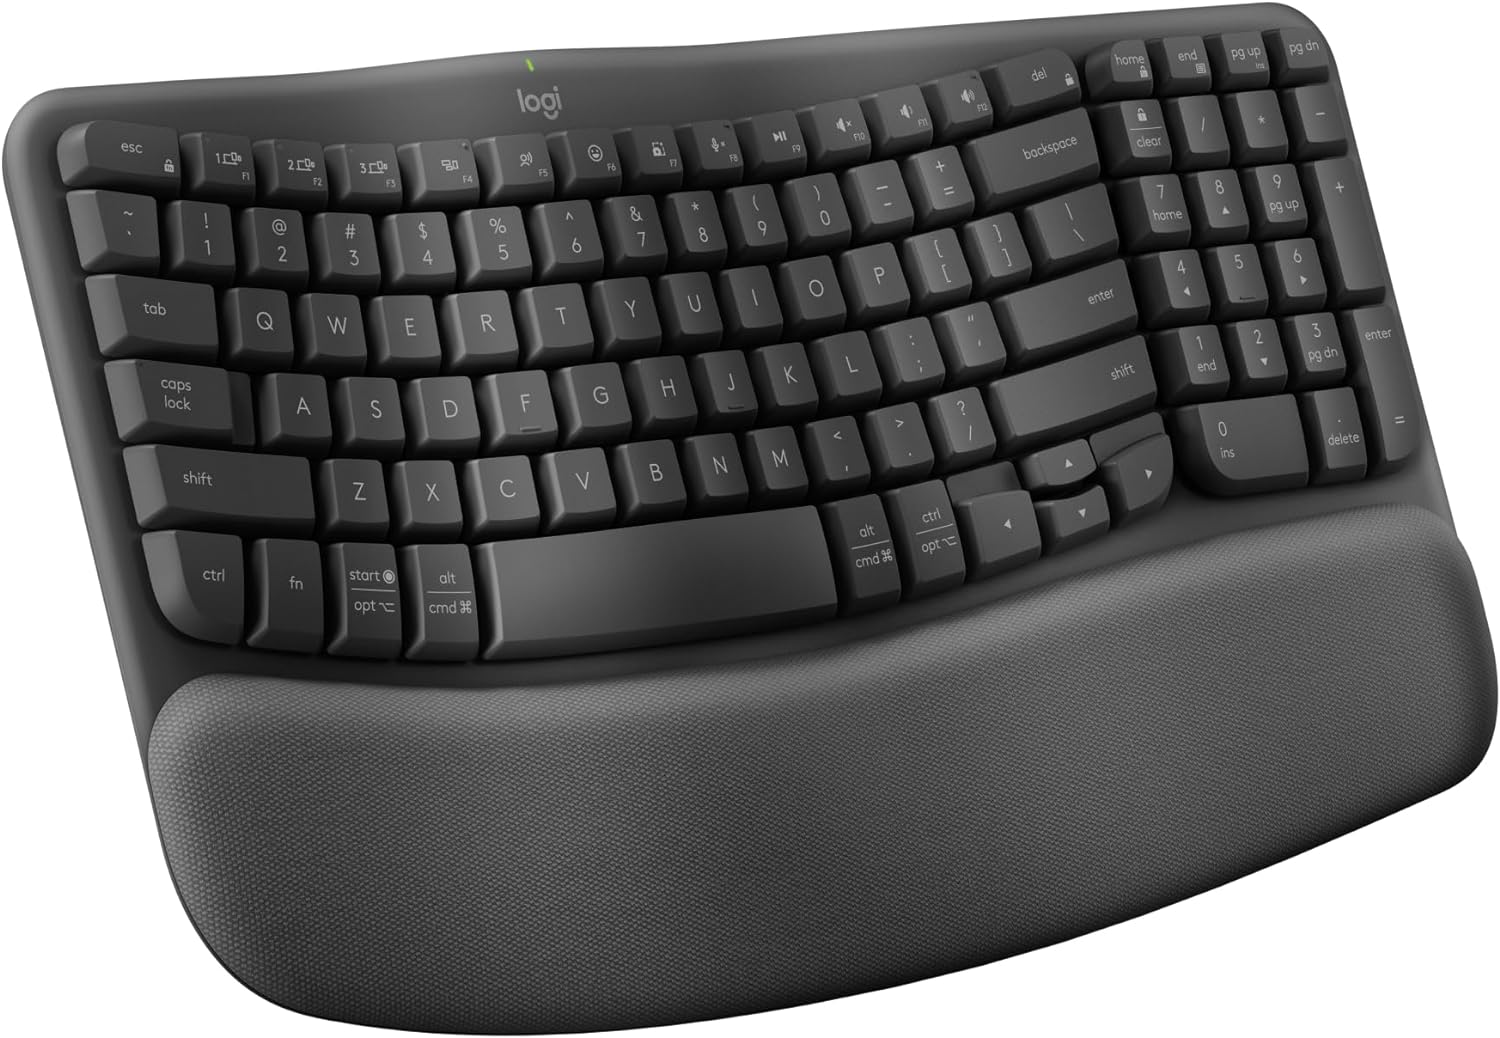 Logitech Wave Keys Wireless Ergonomic Keyboard with Cushioned Palm Rest, Comfortable Natural Typing, Easy-Switch, Bluetooth, Logi Bolt Receiver, for Multi-OS, Windows/Mac - Graphite